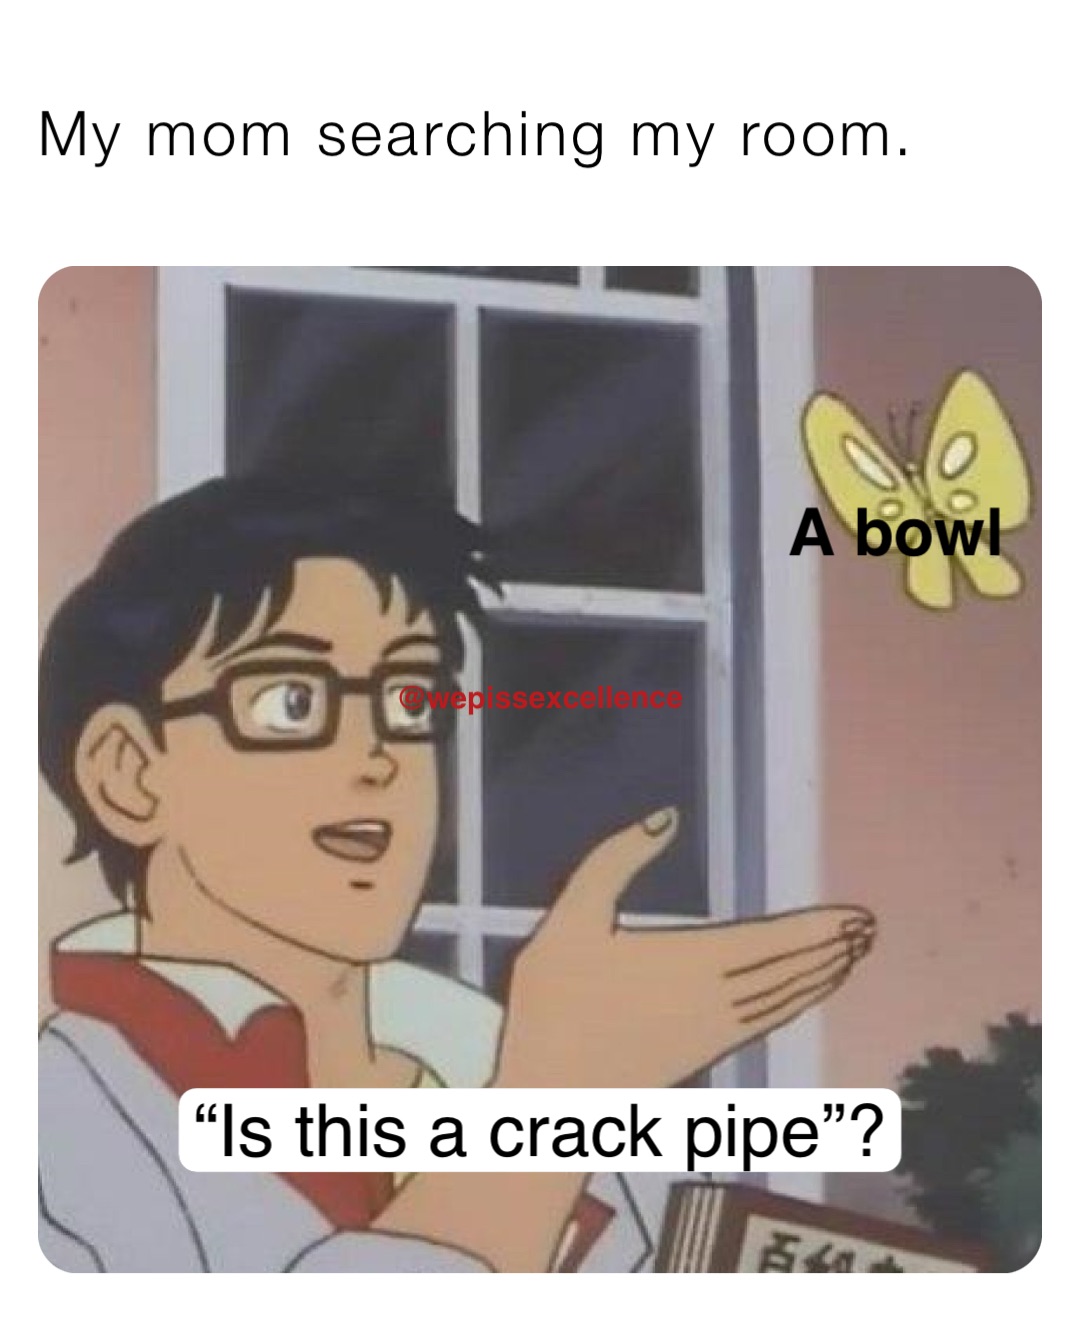 My mom searching my room. A bowl “Is this a crack pipe”?